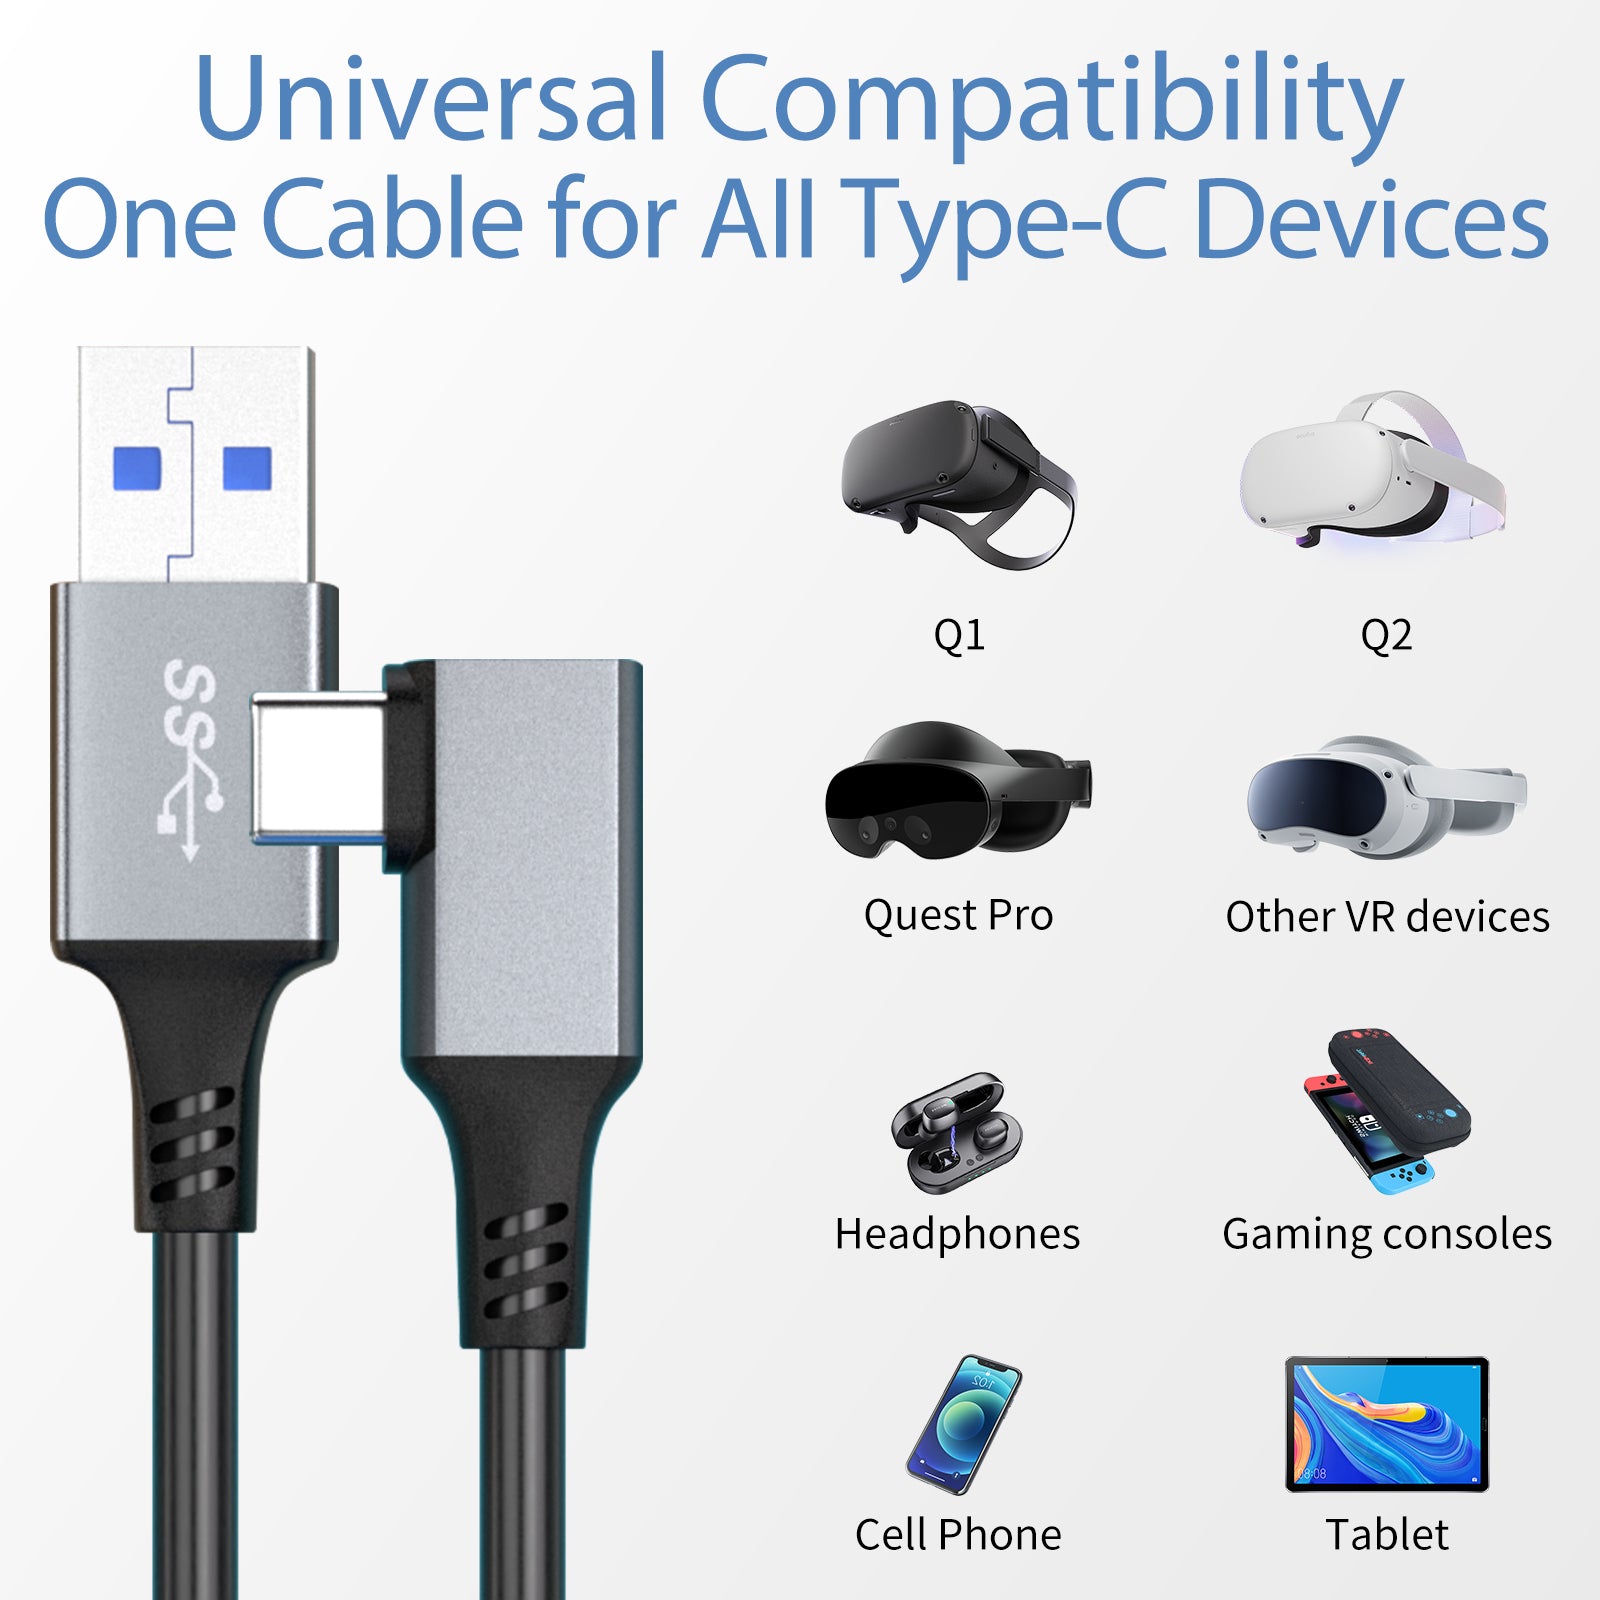 Link Cable Compatible with Oculus Quest 3/Quest 2,High Speed PC Data  Transfer, USB 3.0 to USB C Cable for VR Headset and Gaming PC (16FT)